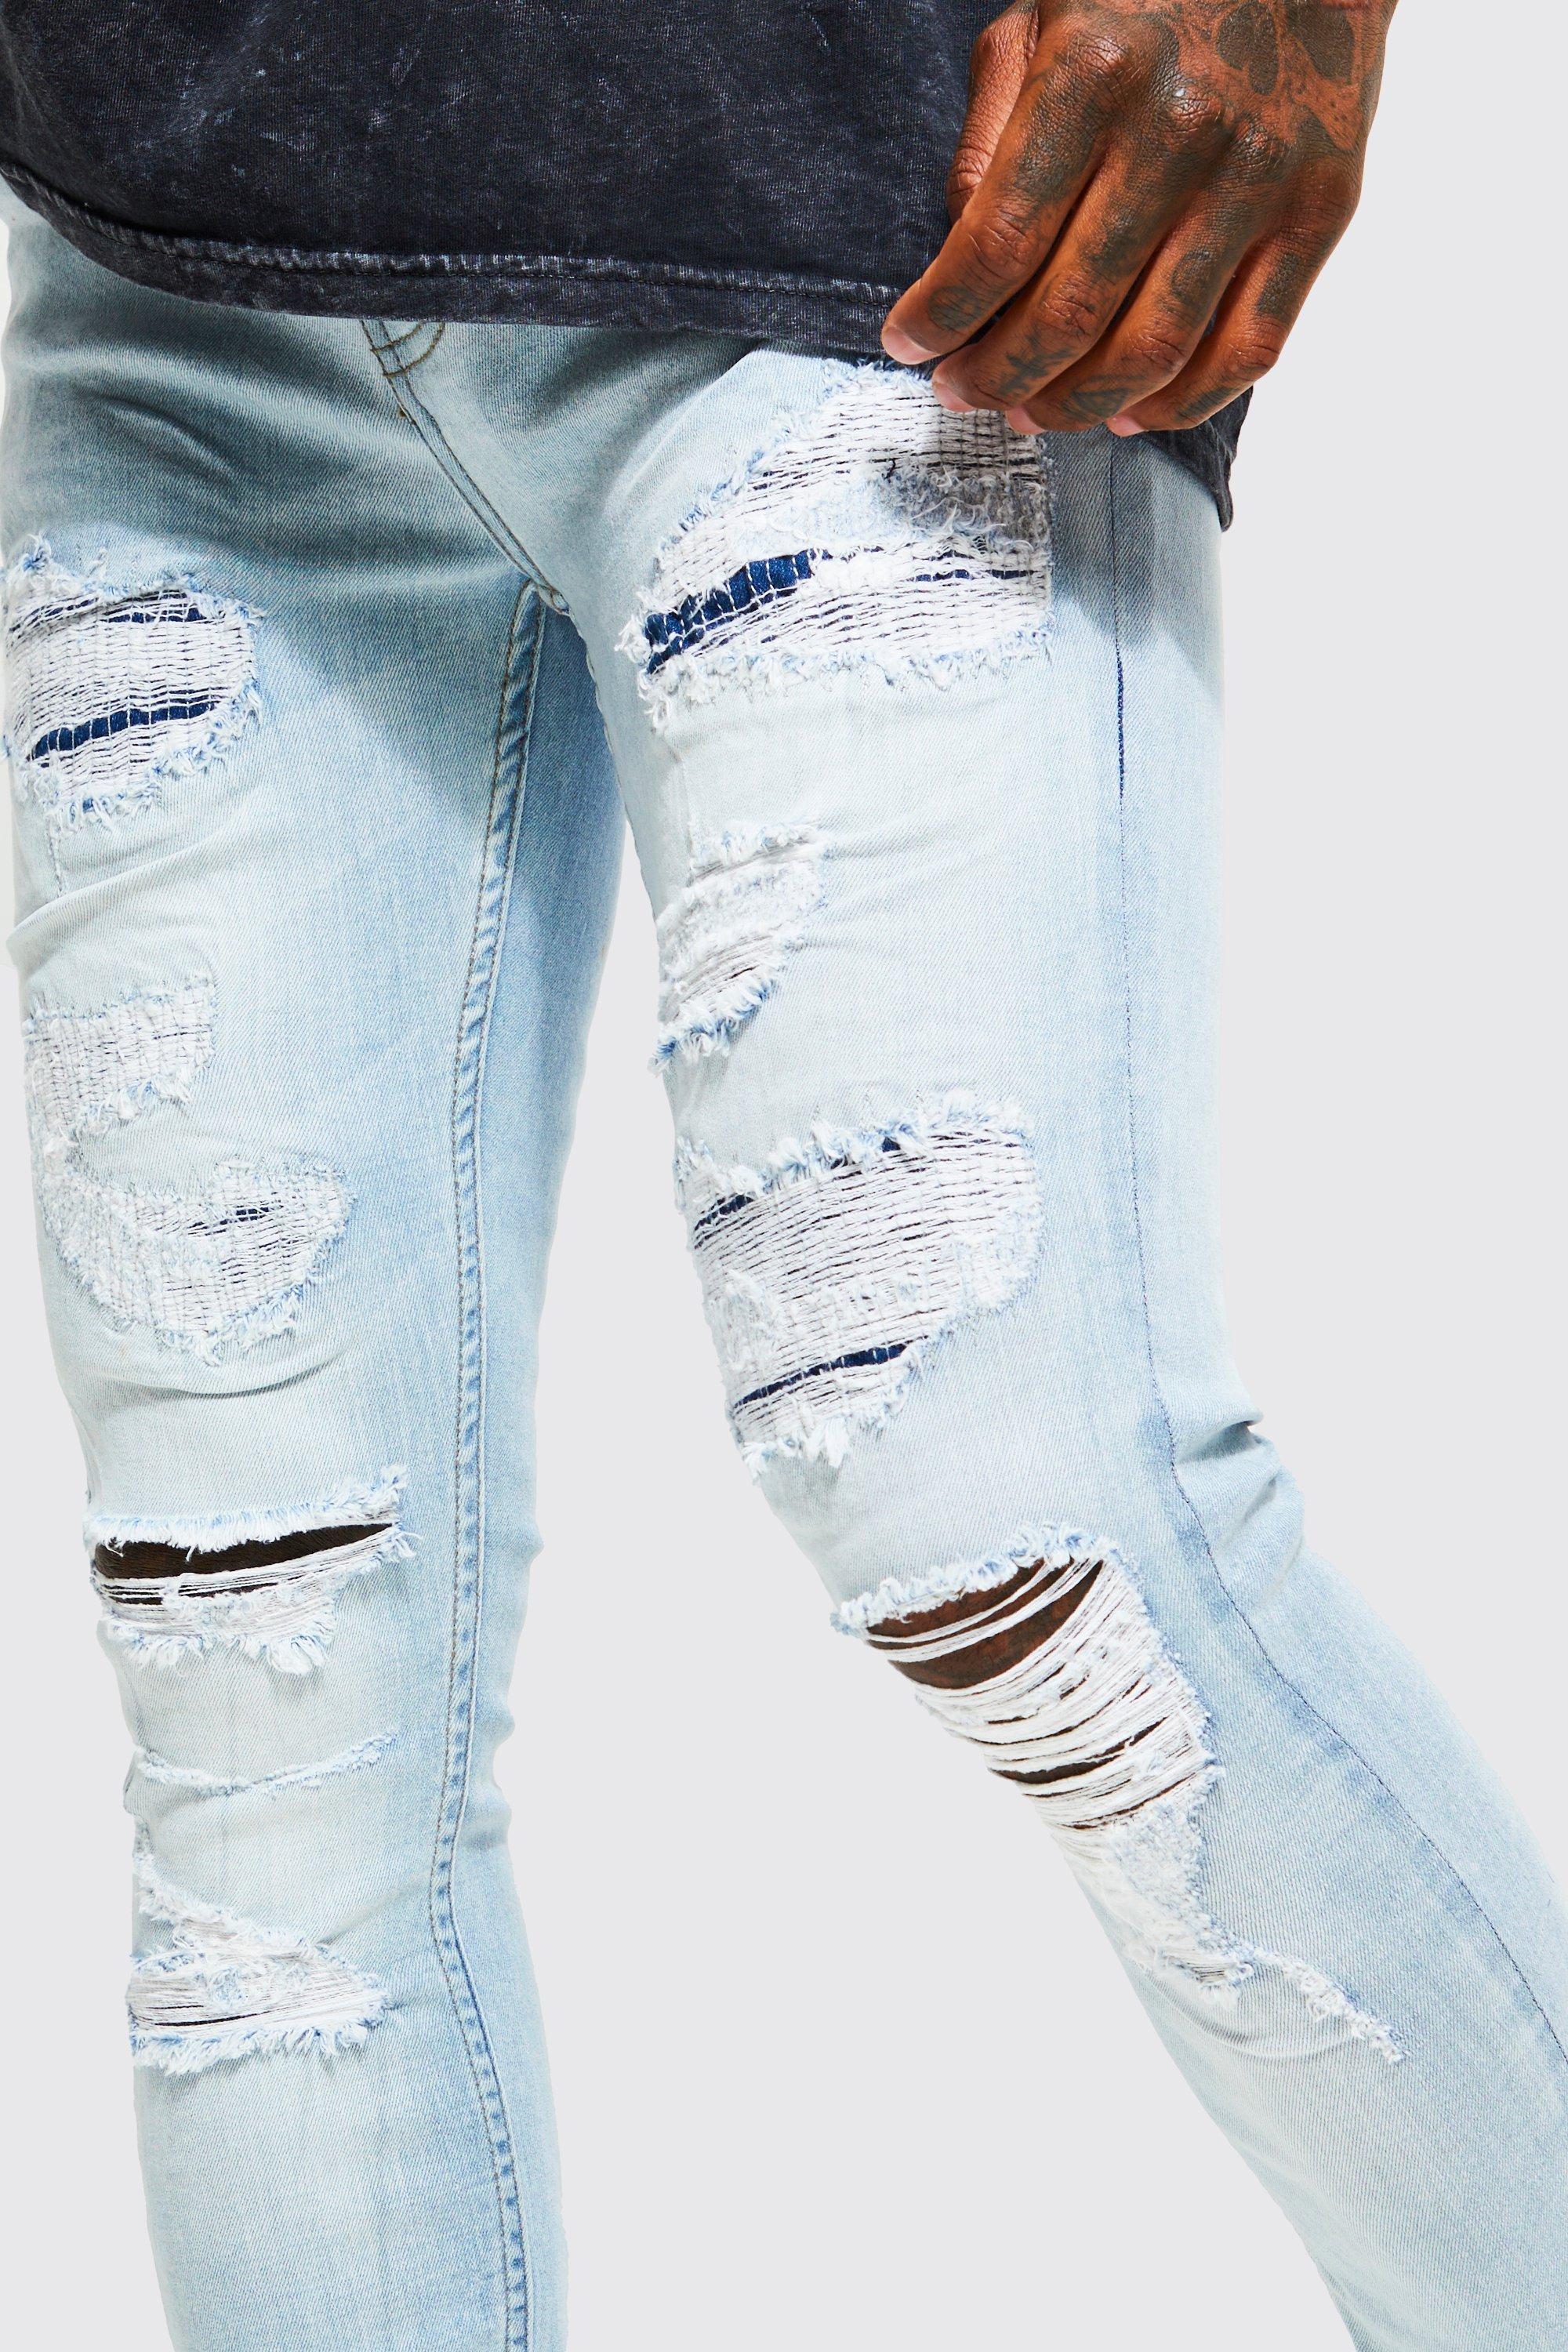 Oppose reptiles Screech Super Skinny Stretch Distressed Ripped Jeans | boohoo